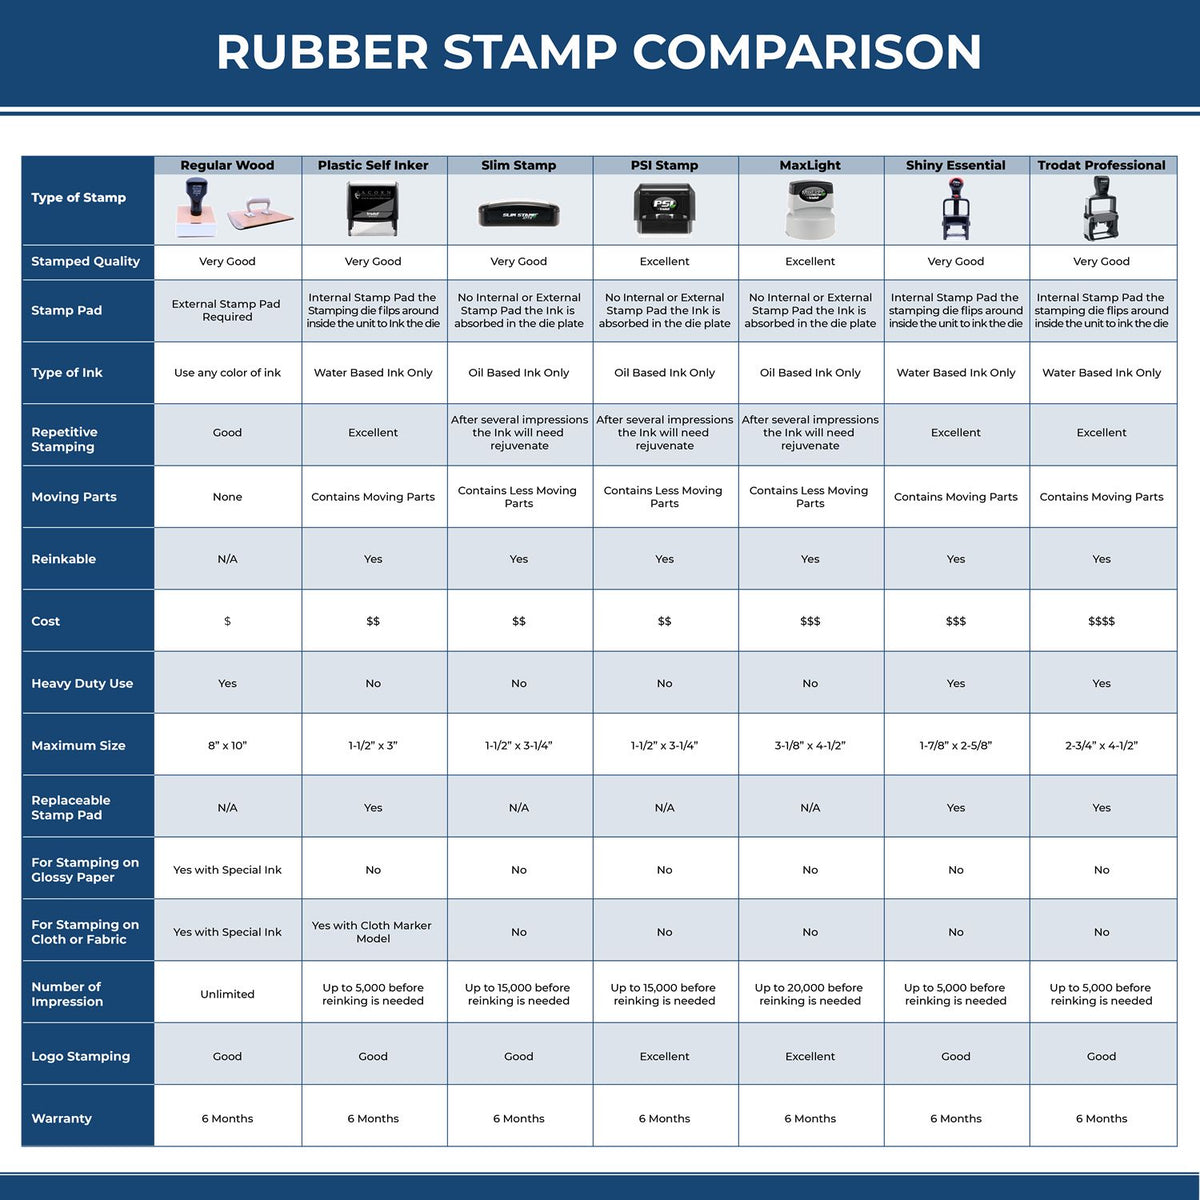 Large Mailed with Date Line Rubber Stamp 4919R Rubber Stamp Comparison